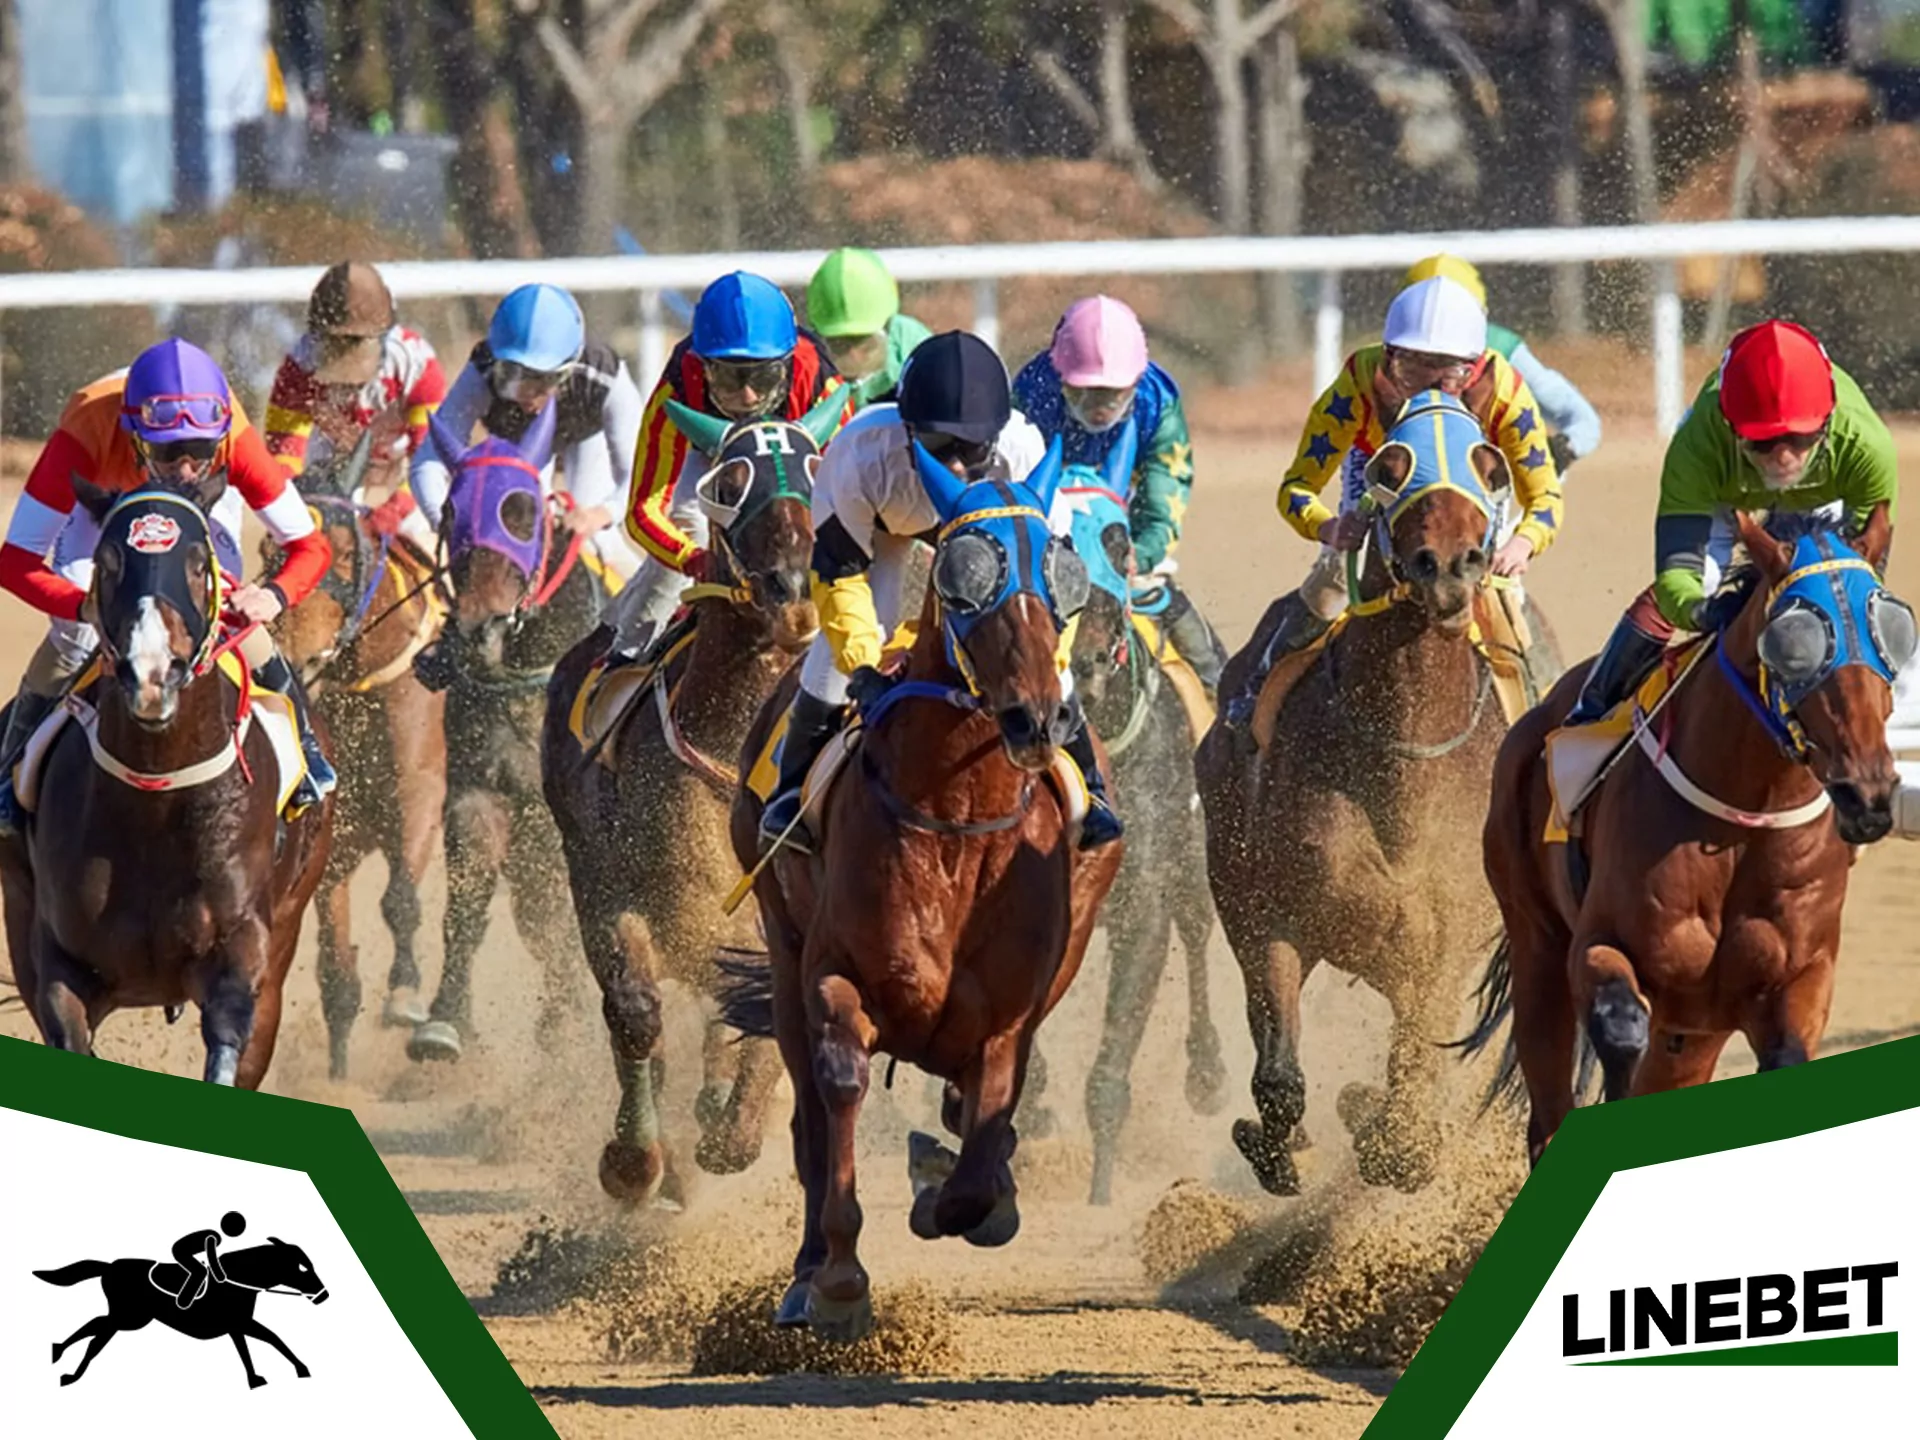 Bet on best horse and win best prizes at Linebet bookie.